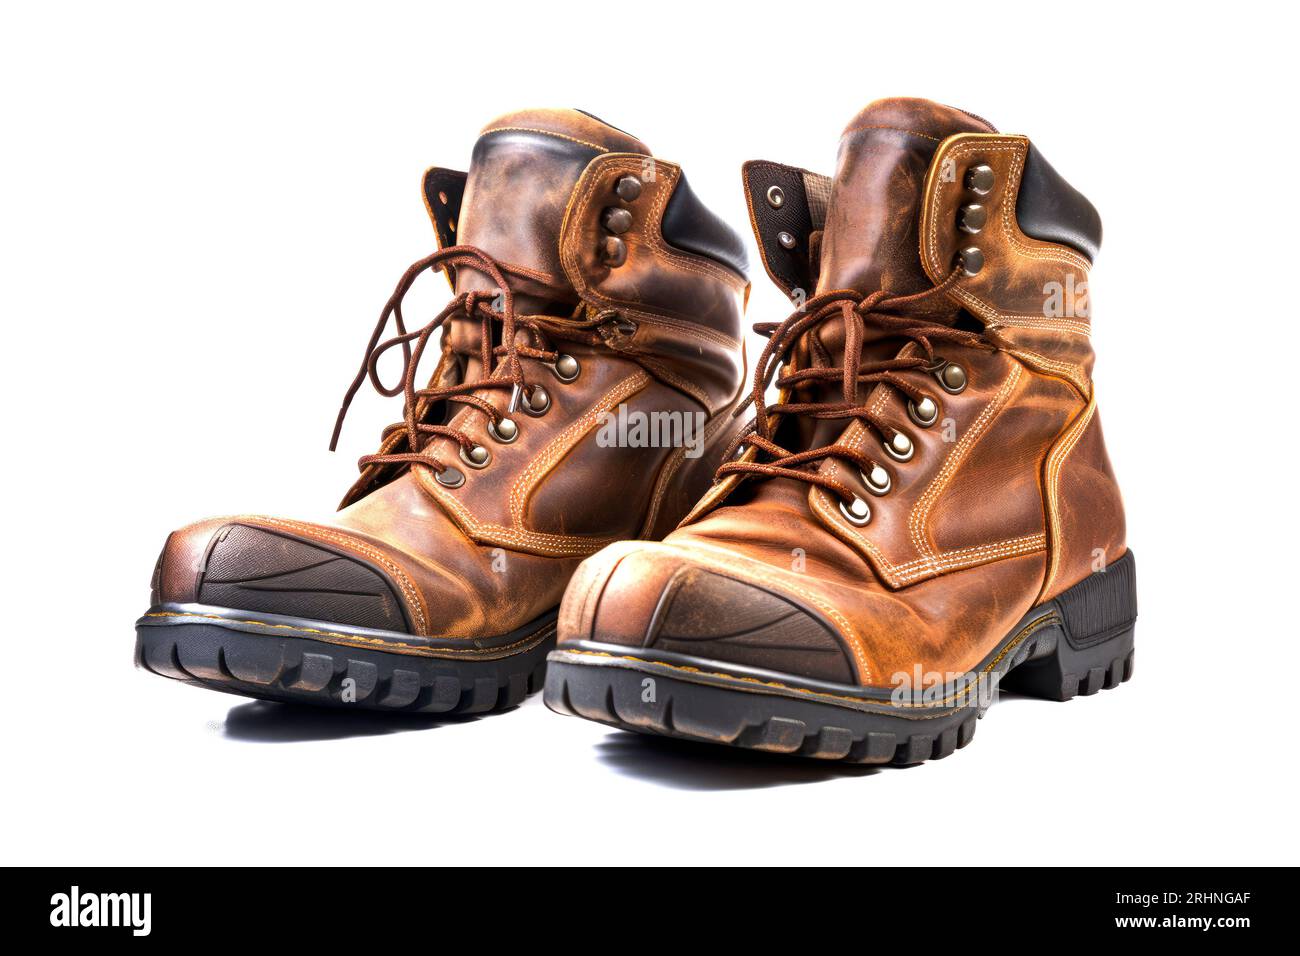 working boots, steel toecap workman's boots cut out, work boots isolated on a white background. Stock Photo